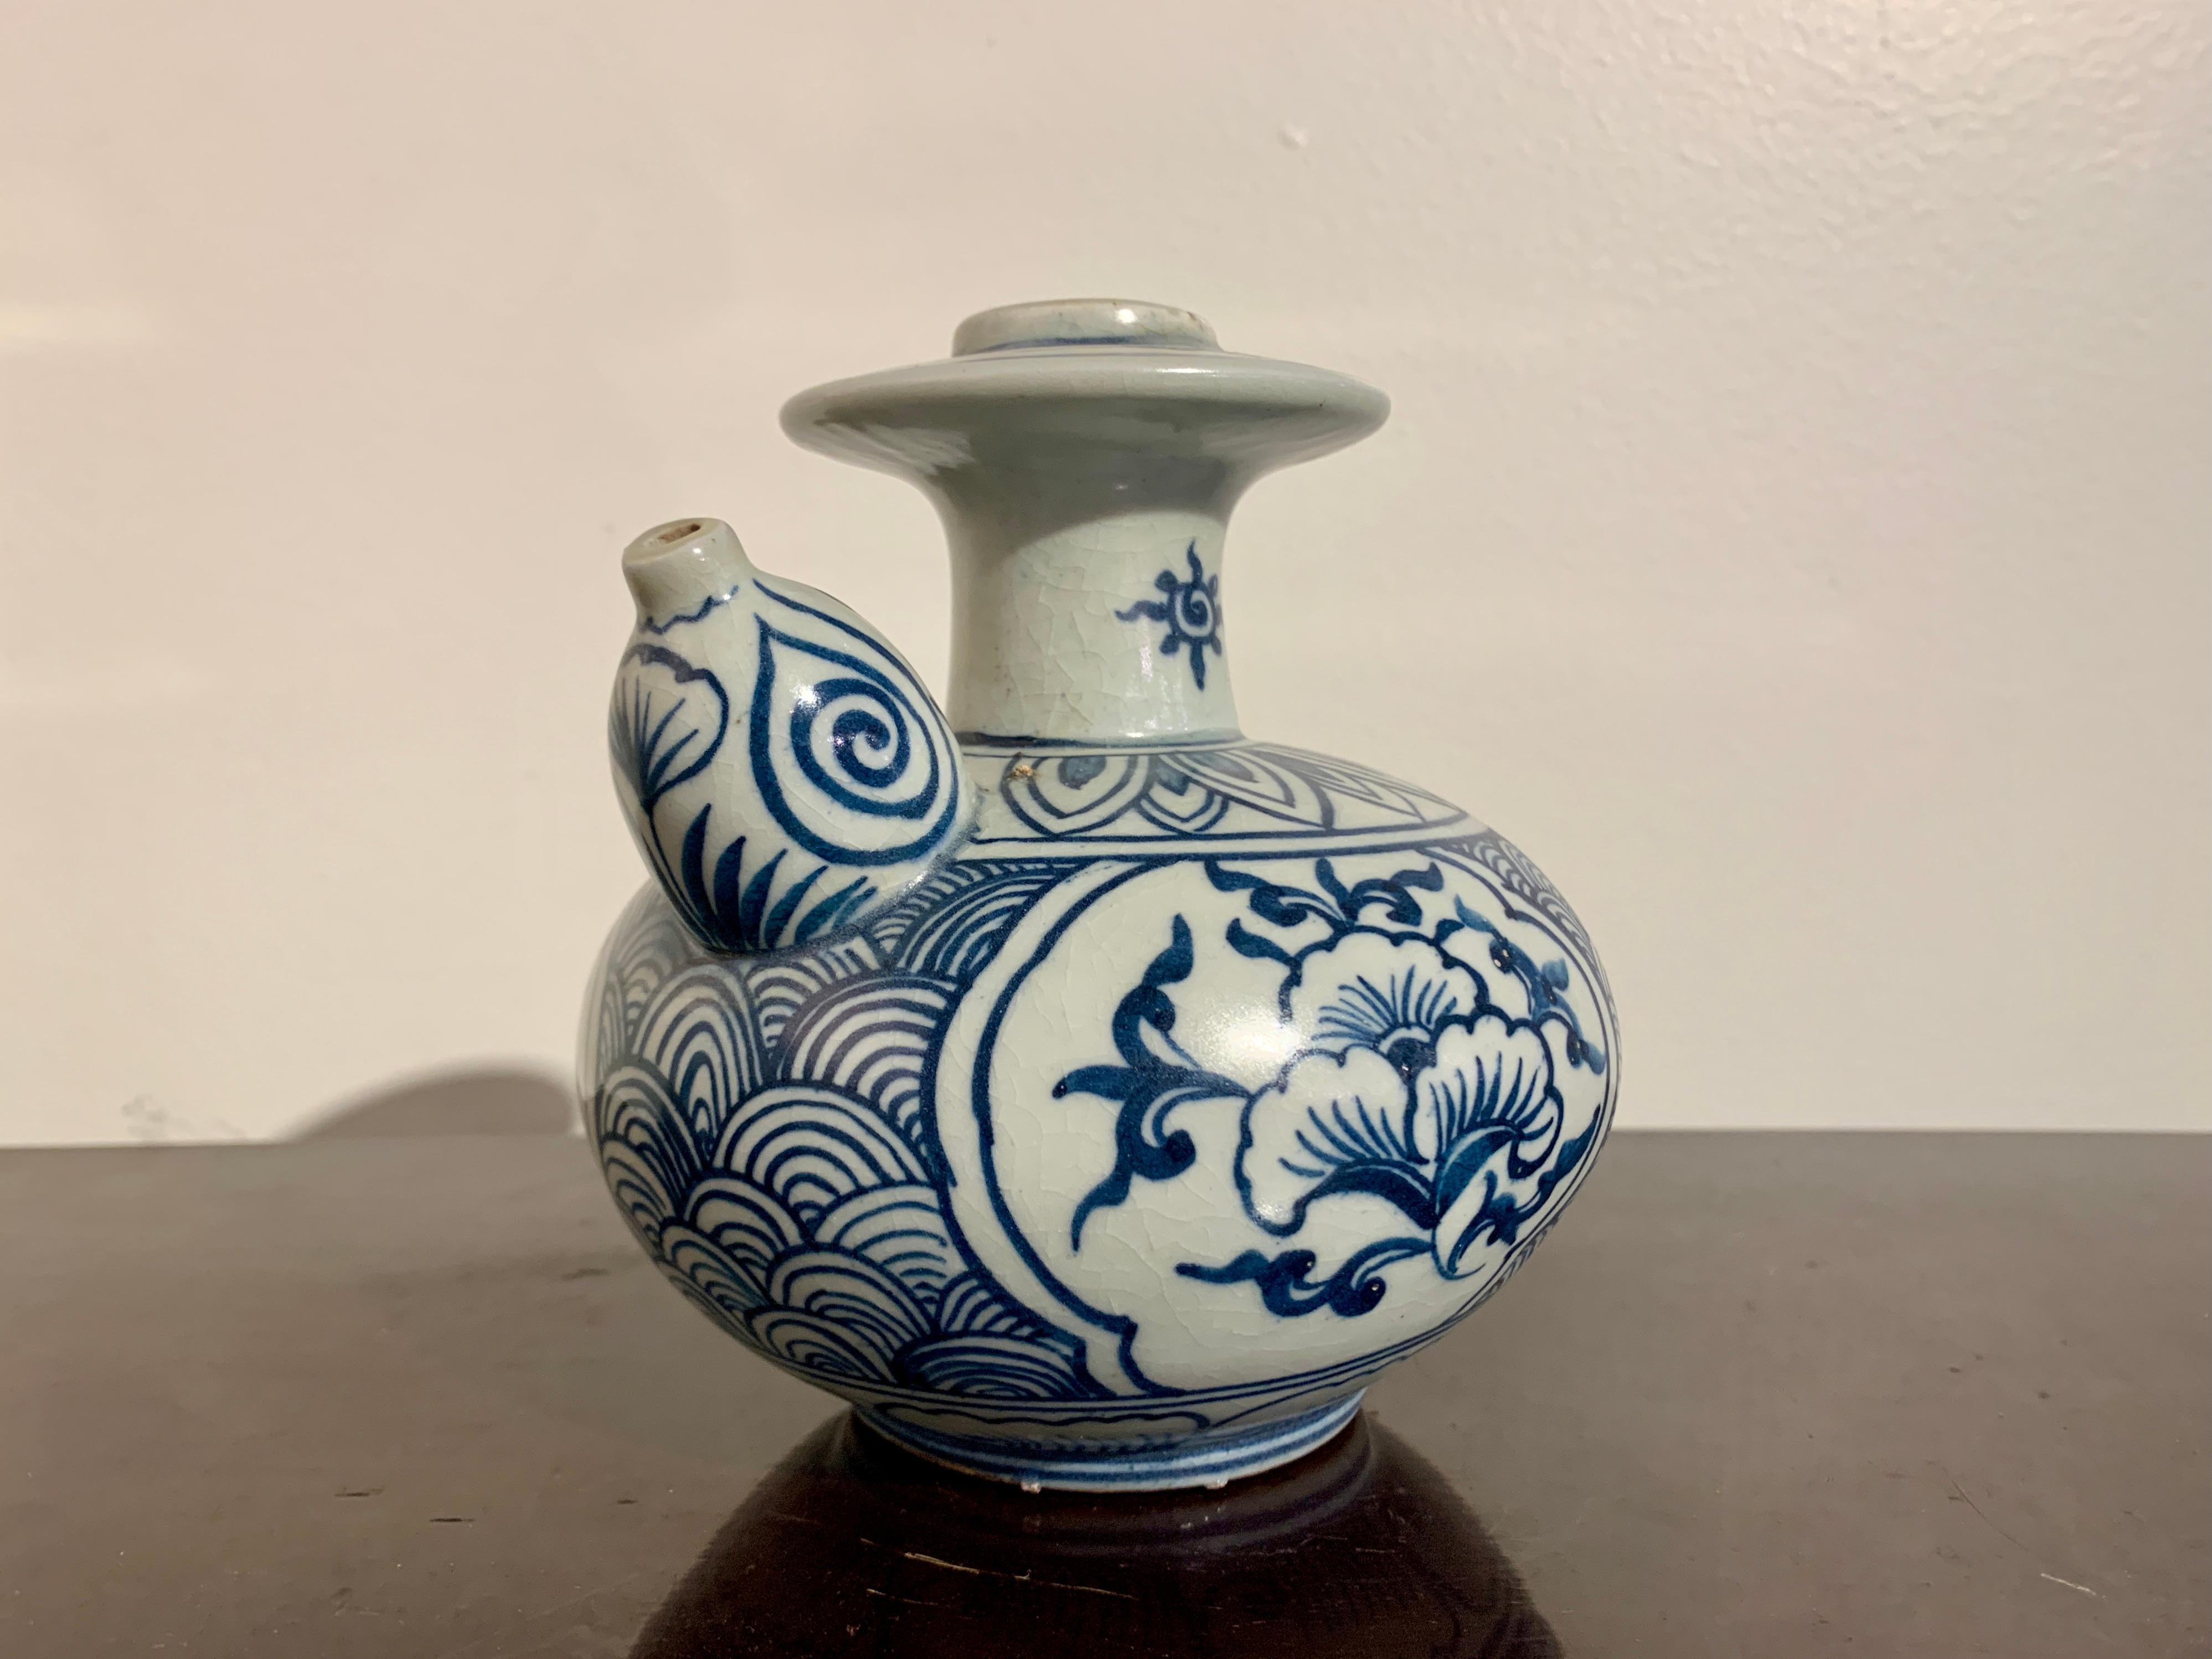 Glazed Small Vietnamese Kendi with Blue and White Design, 15th-16th Century, Vietnam